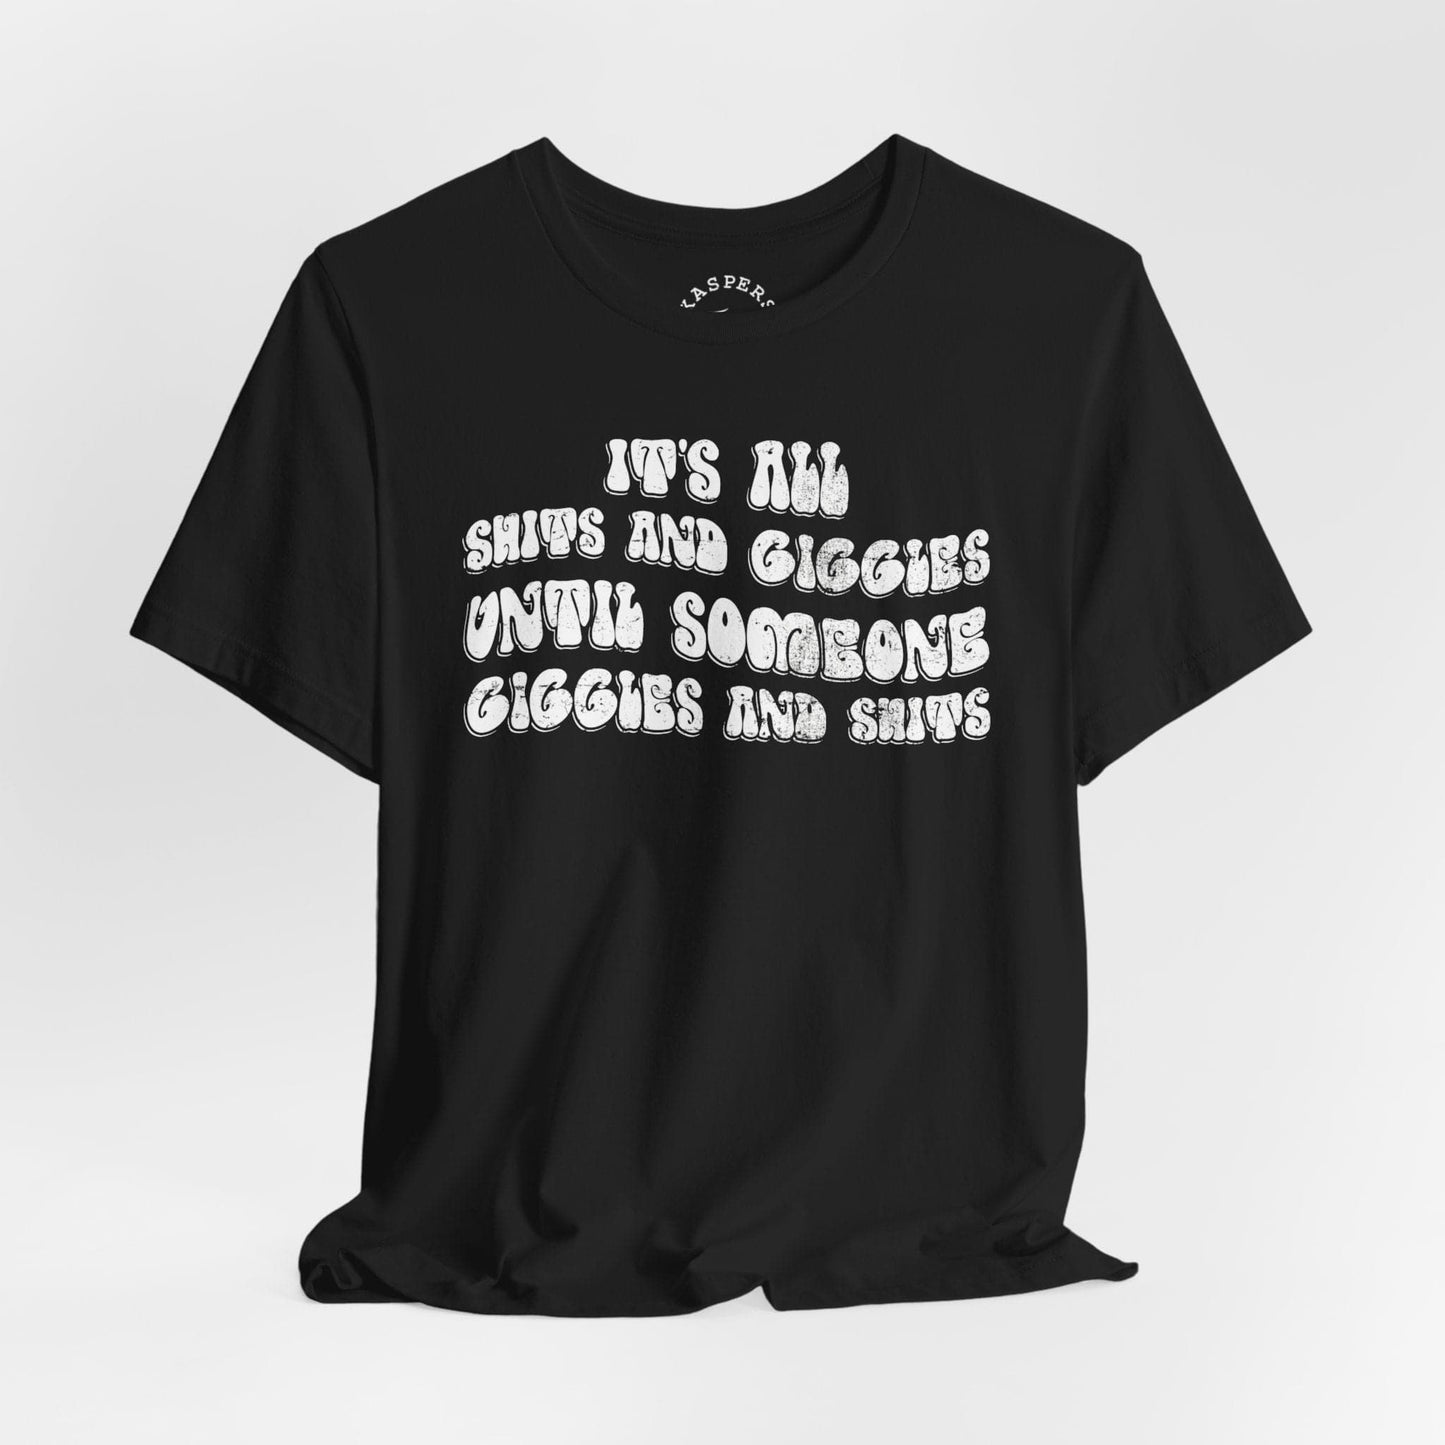 It's All Shits and Giggles Until Someone Giggles And Shits T-Shirt